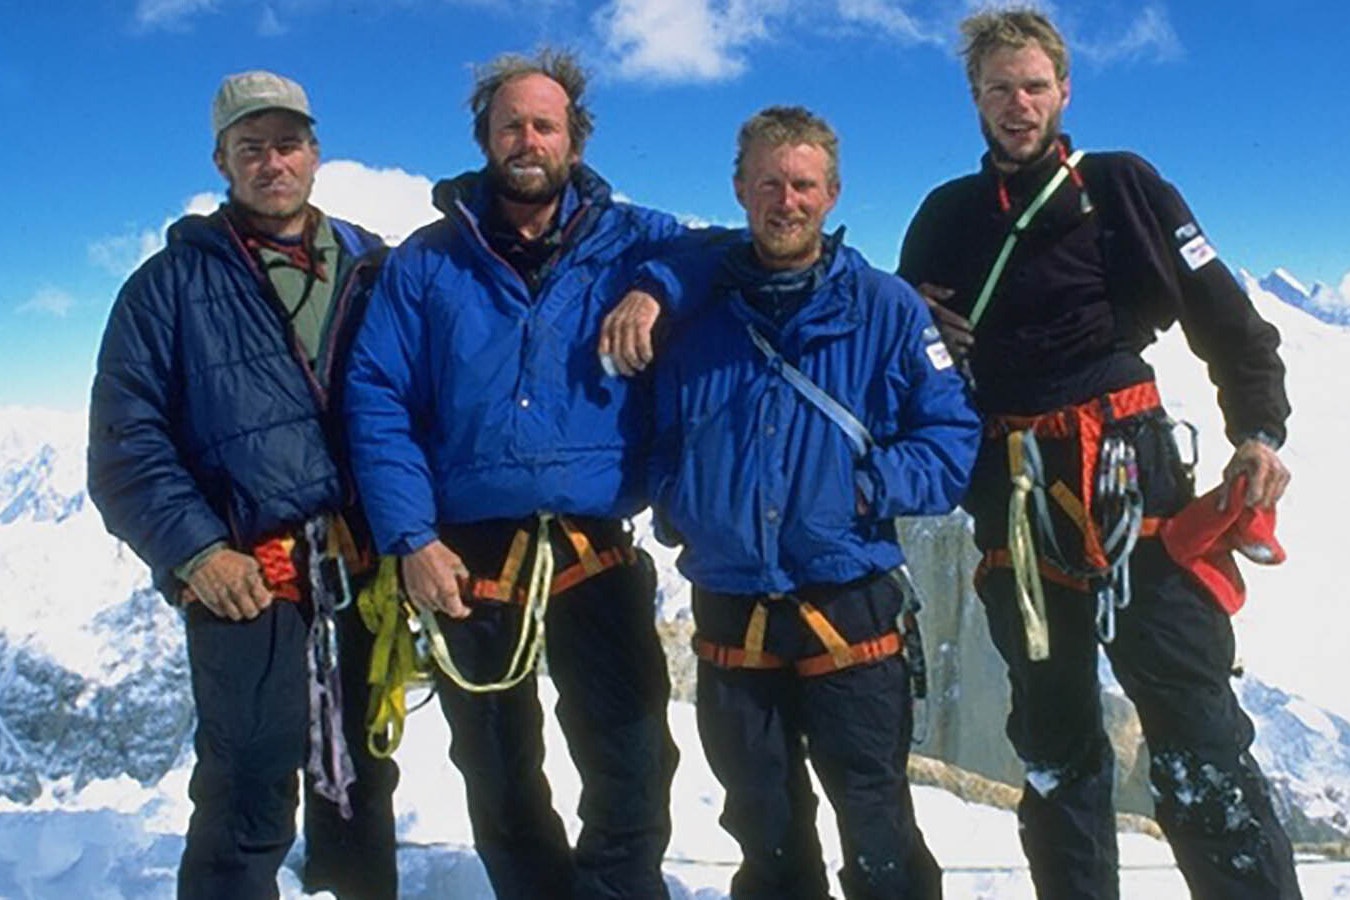 It was Sept. 7, 1995, when a ragtag underdog group of climbers from Wyoming pioneered the now-famous Cowboy Direct route up Trango Towers in the Himalaya. They are, in no particular order, Todd Skinner, Mike Lilygren, Bobby Model and Jeff Bechtel.